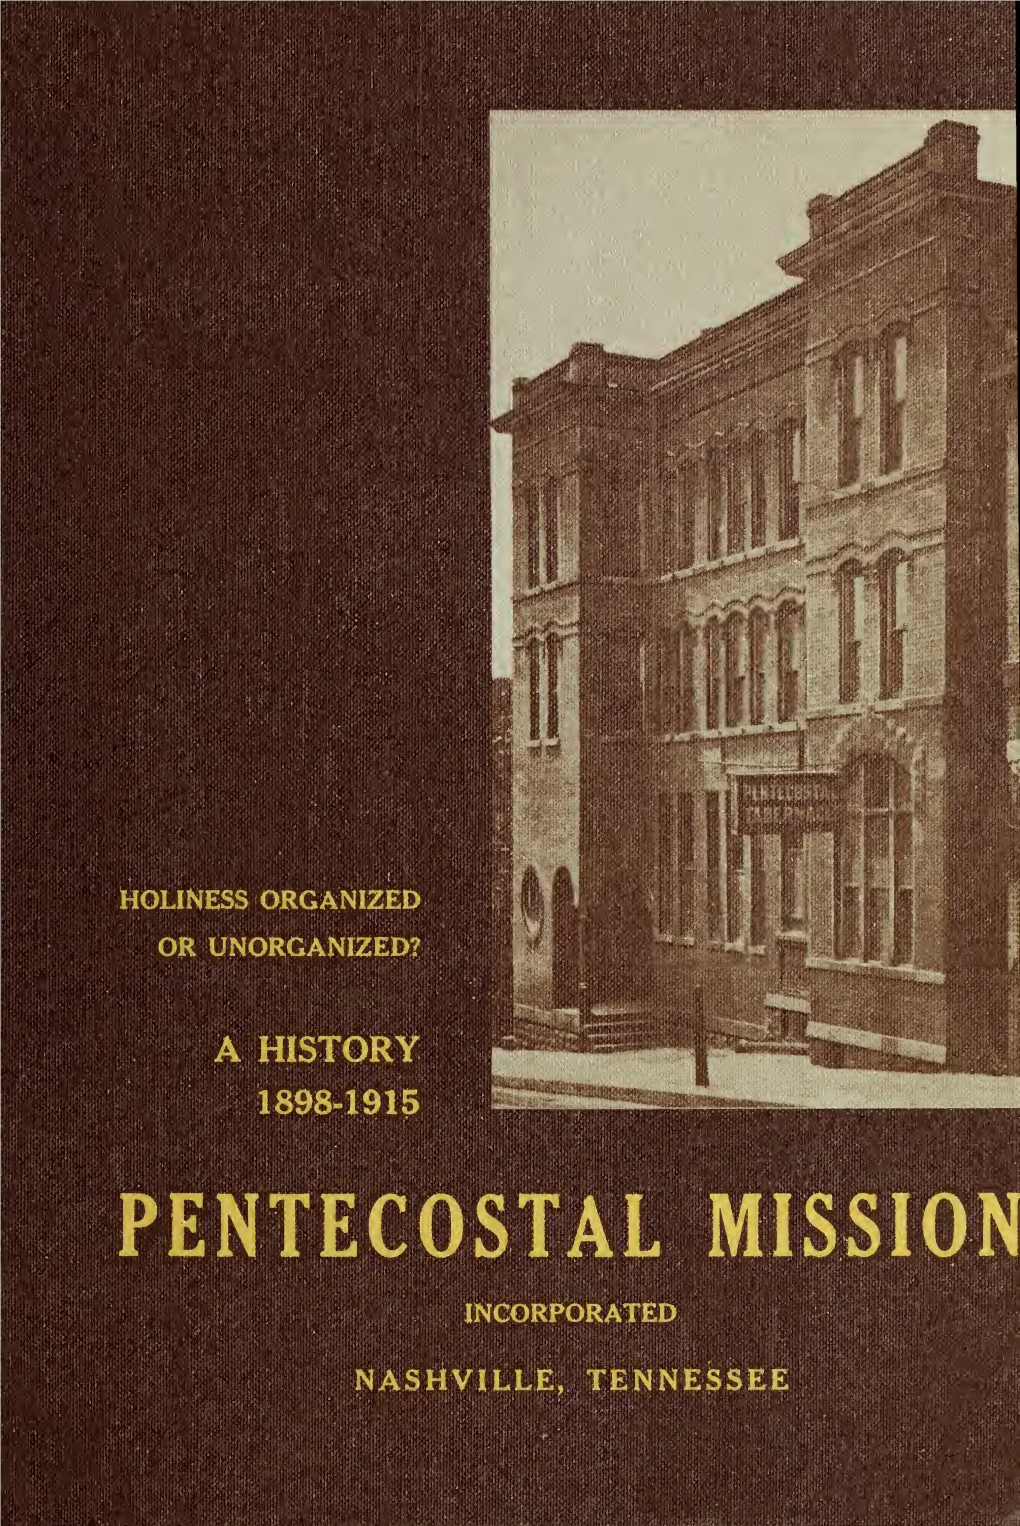 A History 1898-1915 of the Pentecostal Mission, Inc